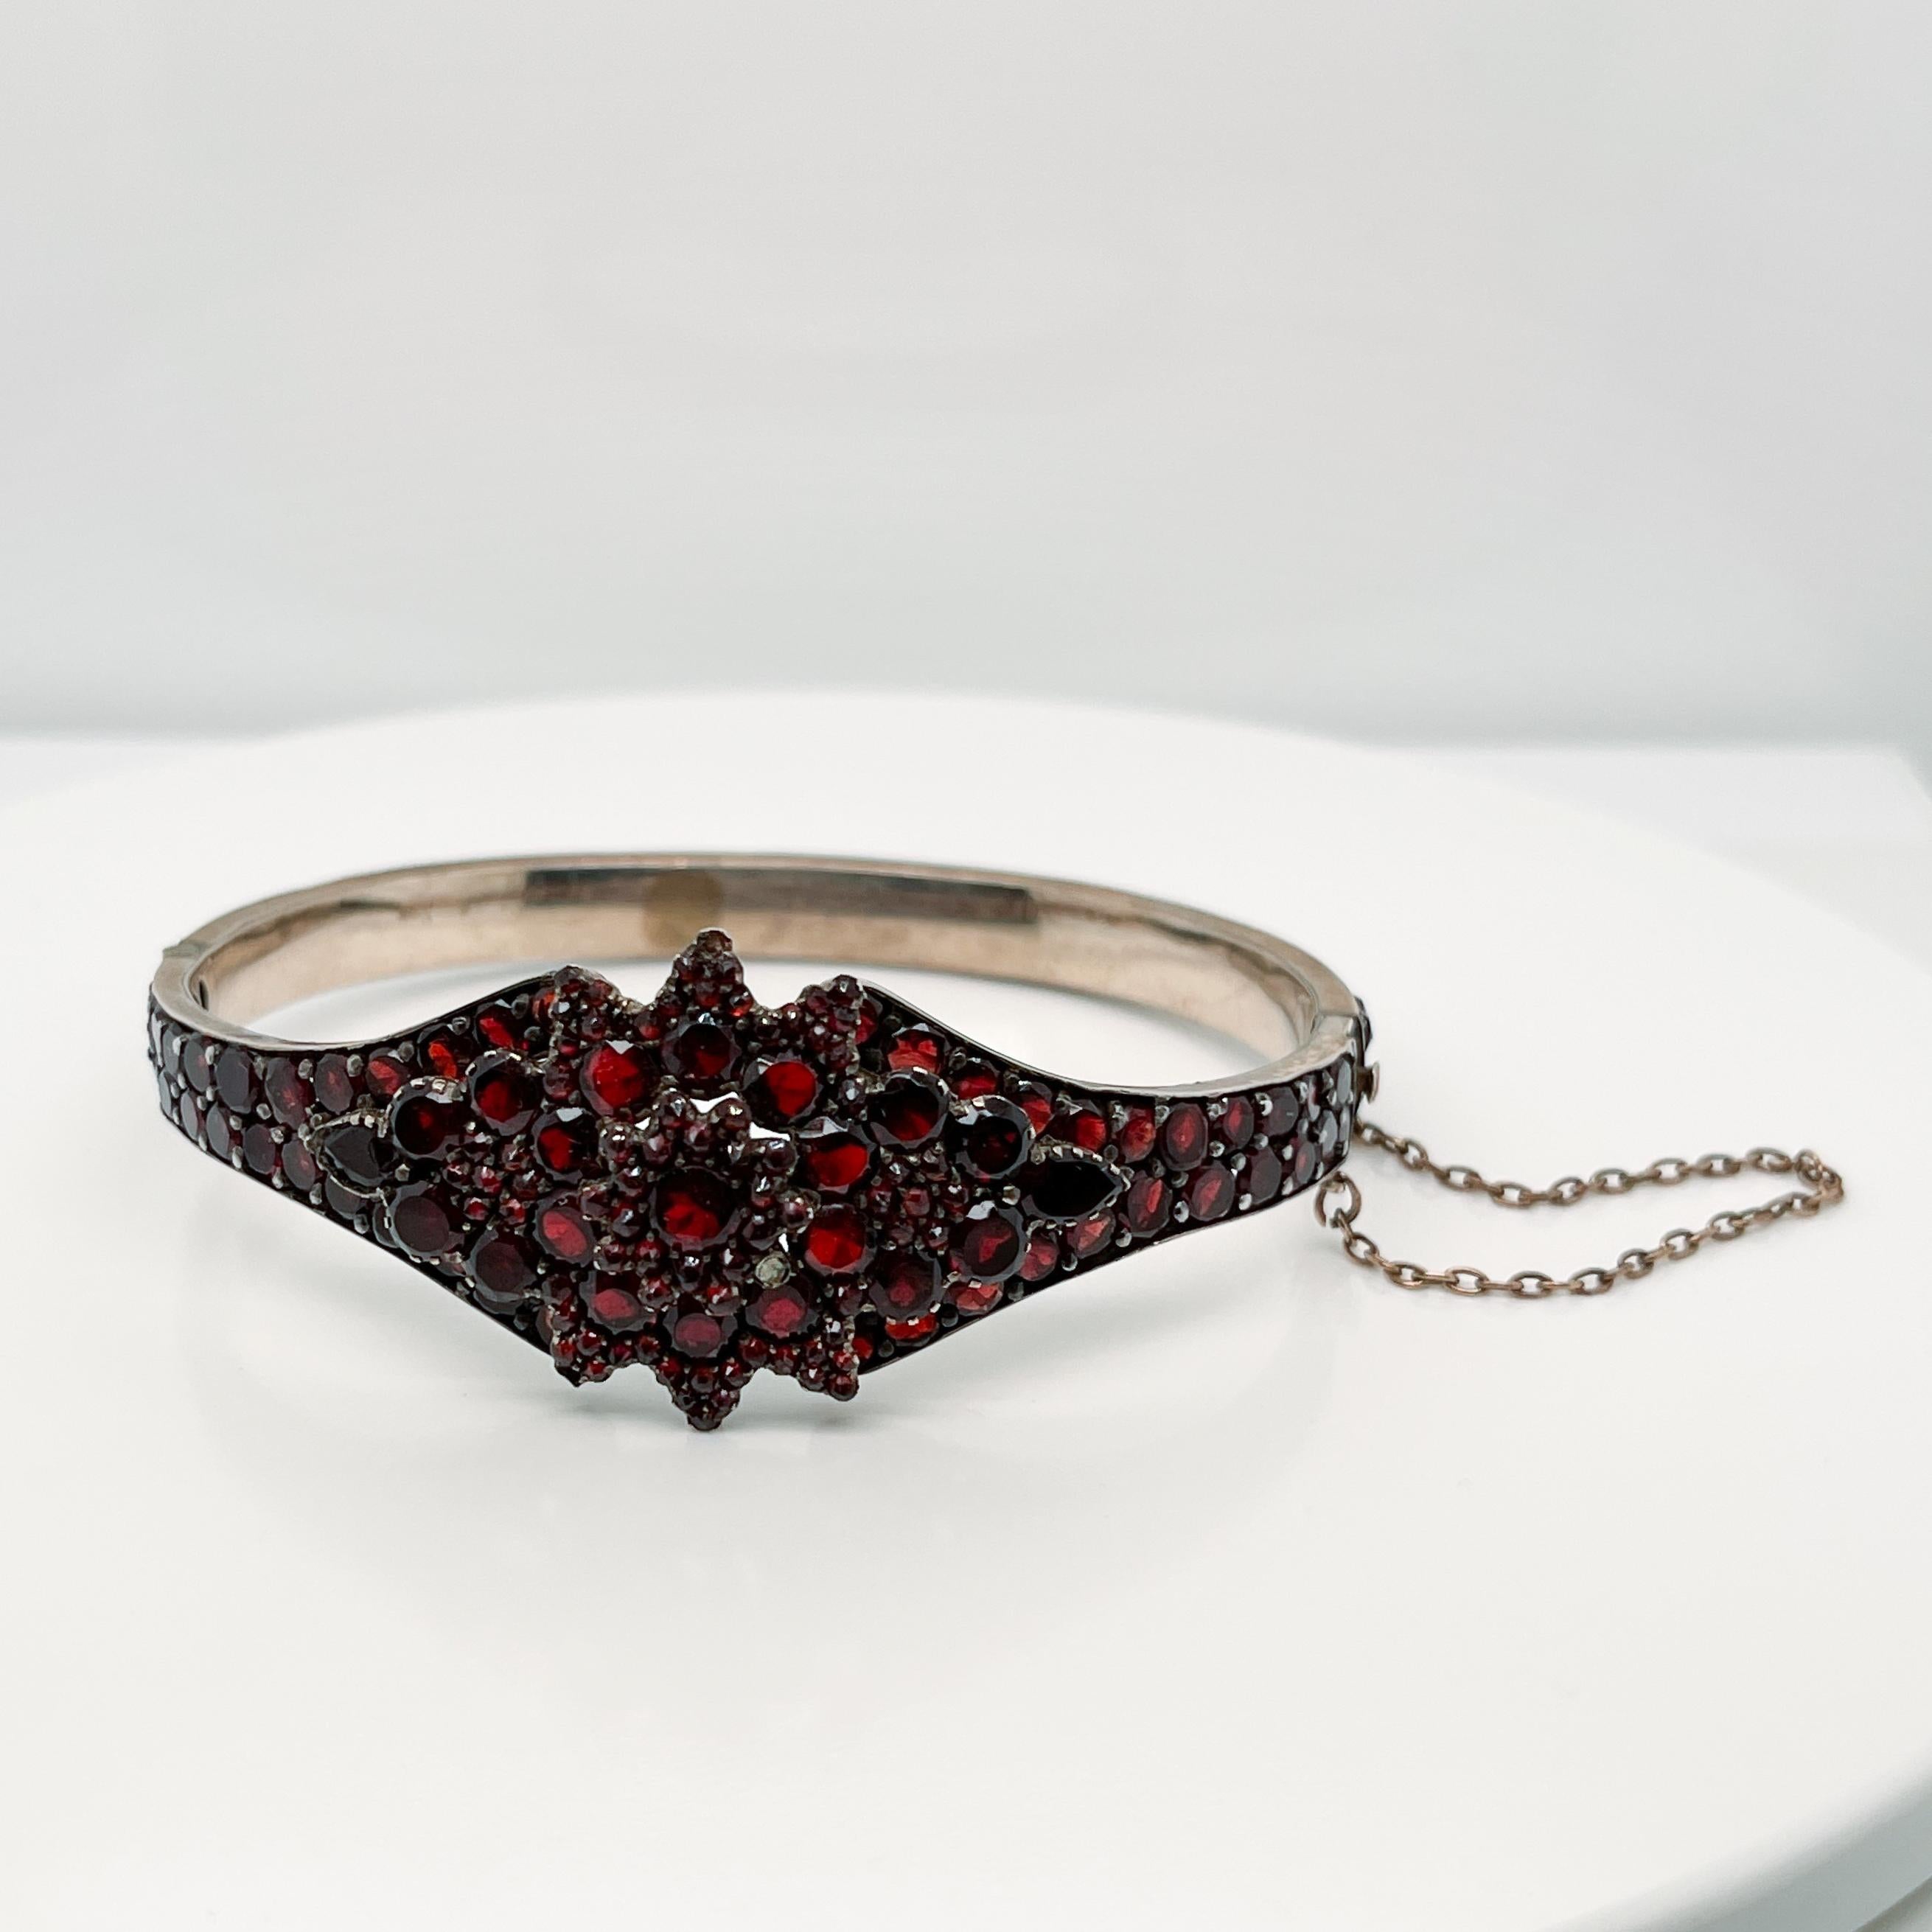 A very fine Antique Bohemian gold-filled bangle bracelet. 

Prong set with garnets in a flower pattern to the top and around the circumference of the bracelet. 

The bracelet opens at the middle on a hinge and is secured by both a box clasp and